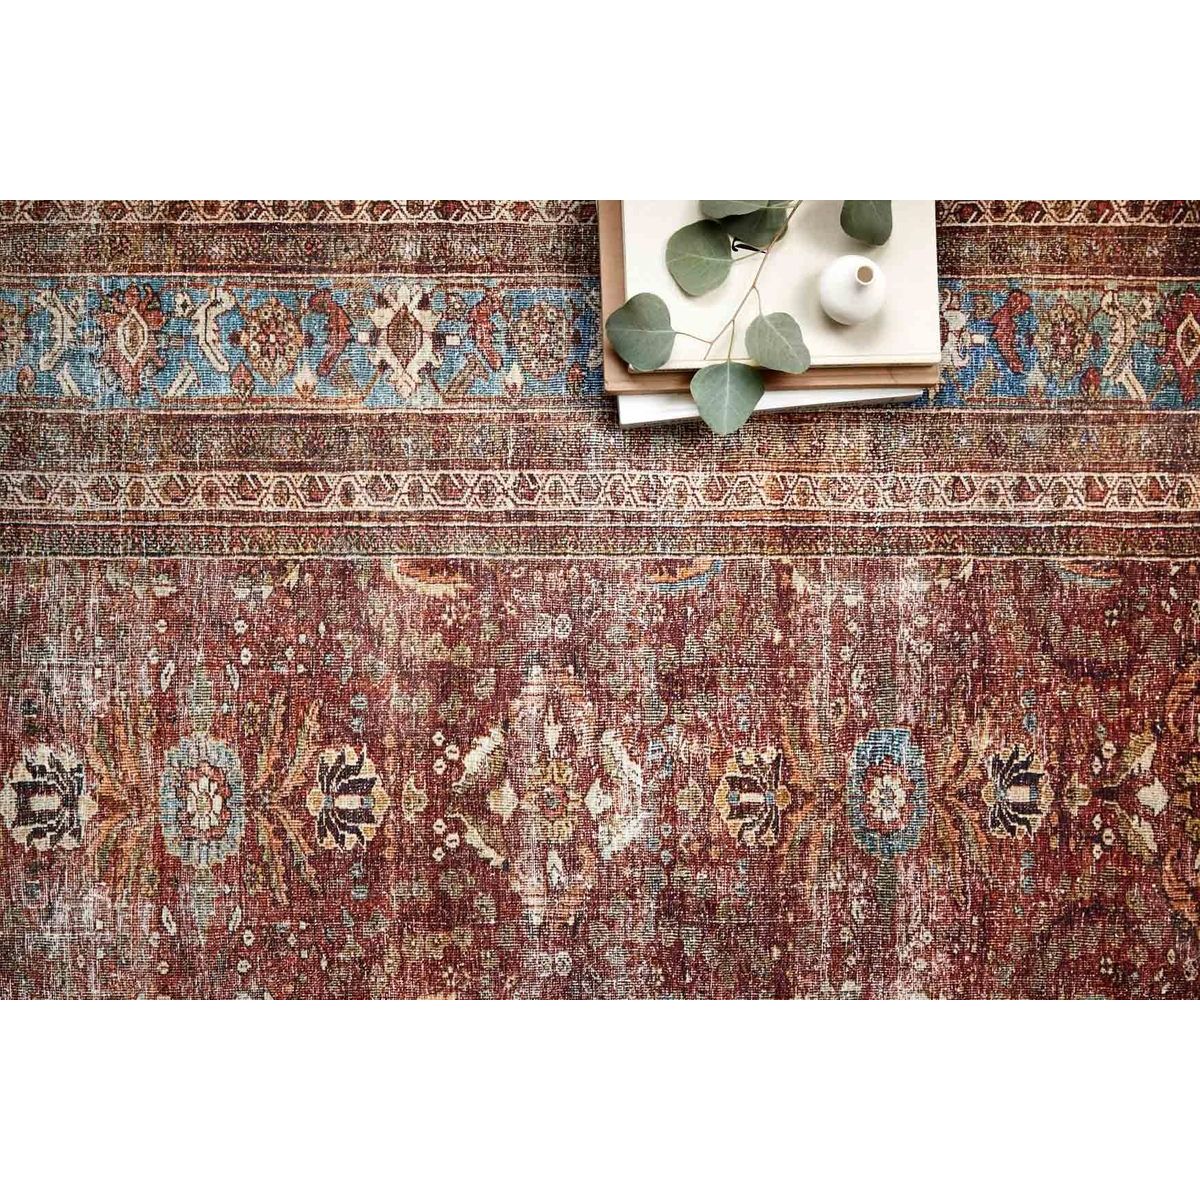 The Layla Collection is traditional and timeless, with a beautiful lived-in design that captures the spirit of an old-world rug. This traditional power-loomed rug is crafted of 100% polyester with a classic and sophisticated color palette and subtle patina.  Power Loomed 100% Polyester LAY-01 Brick/Blue